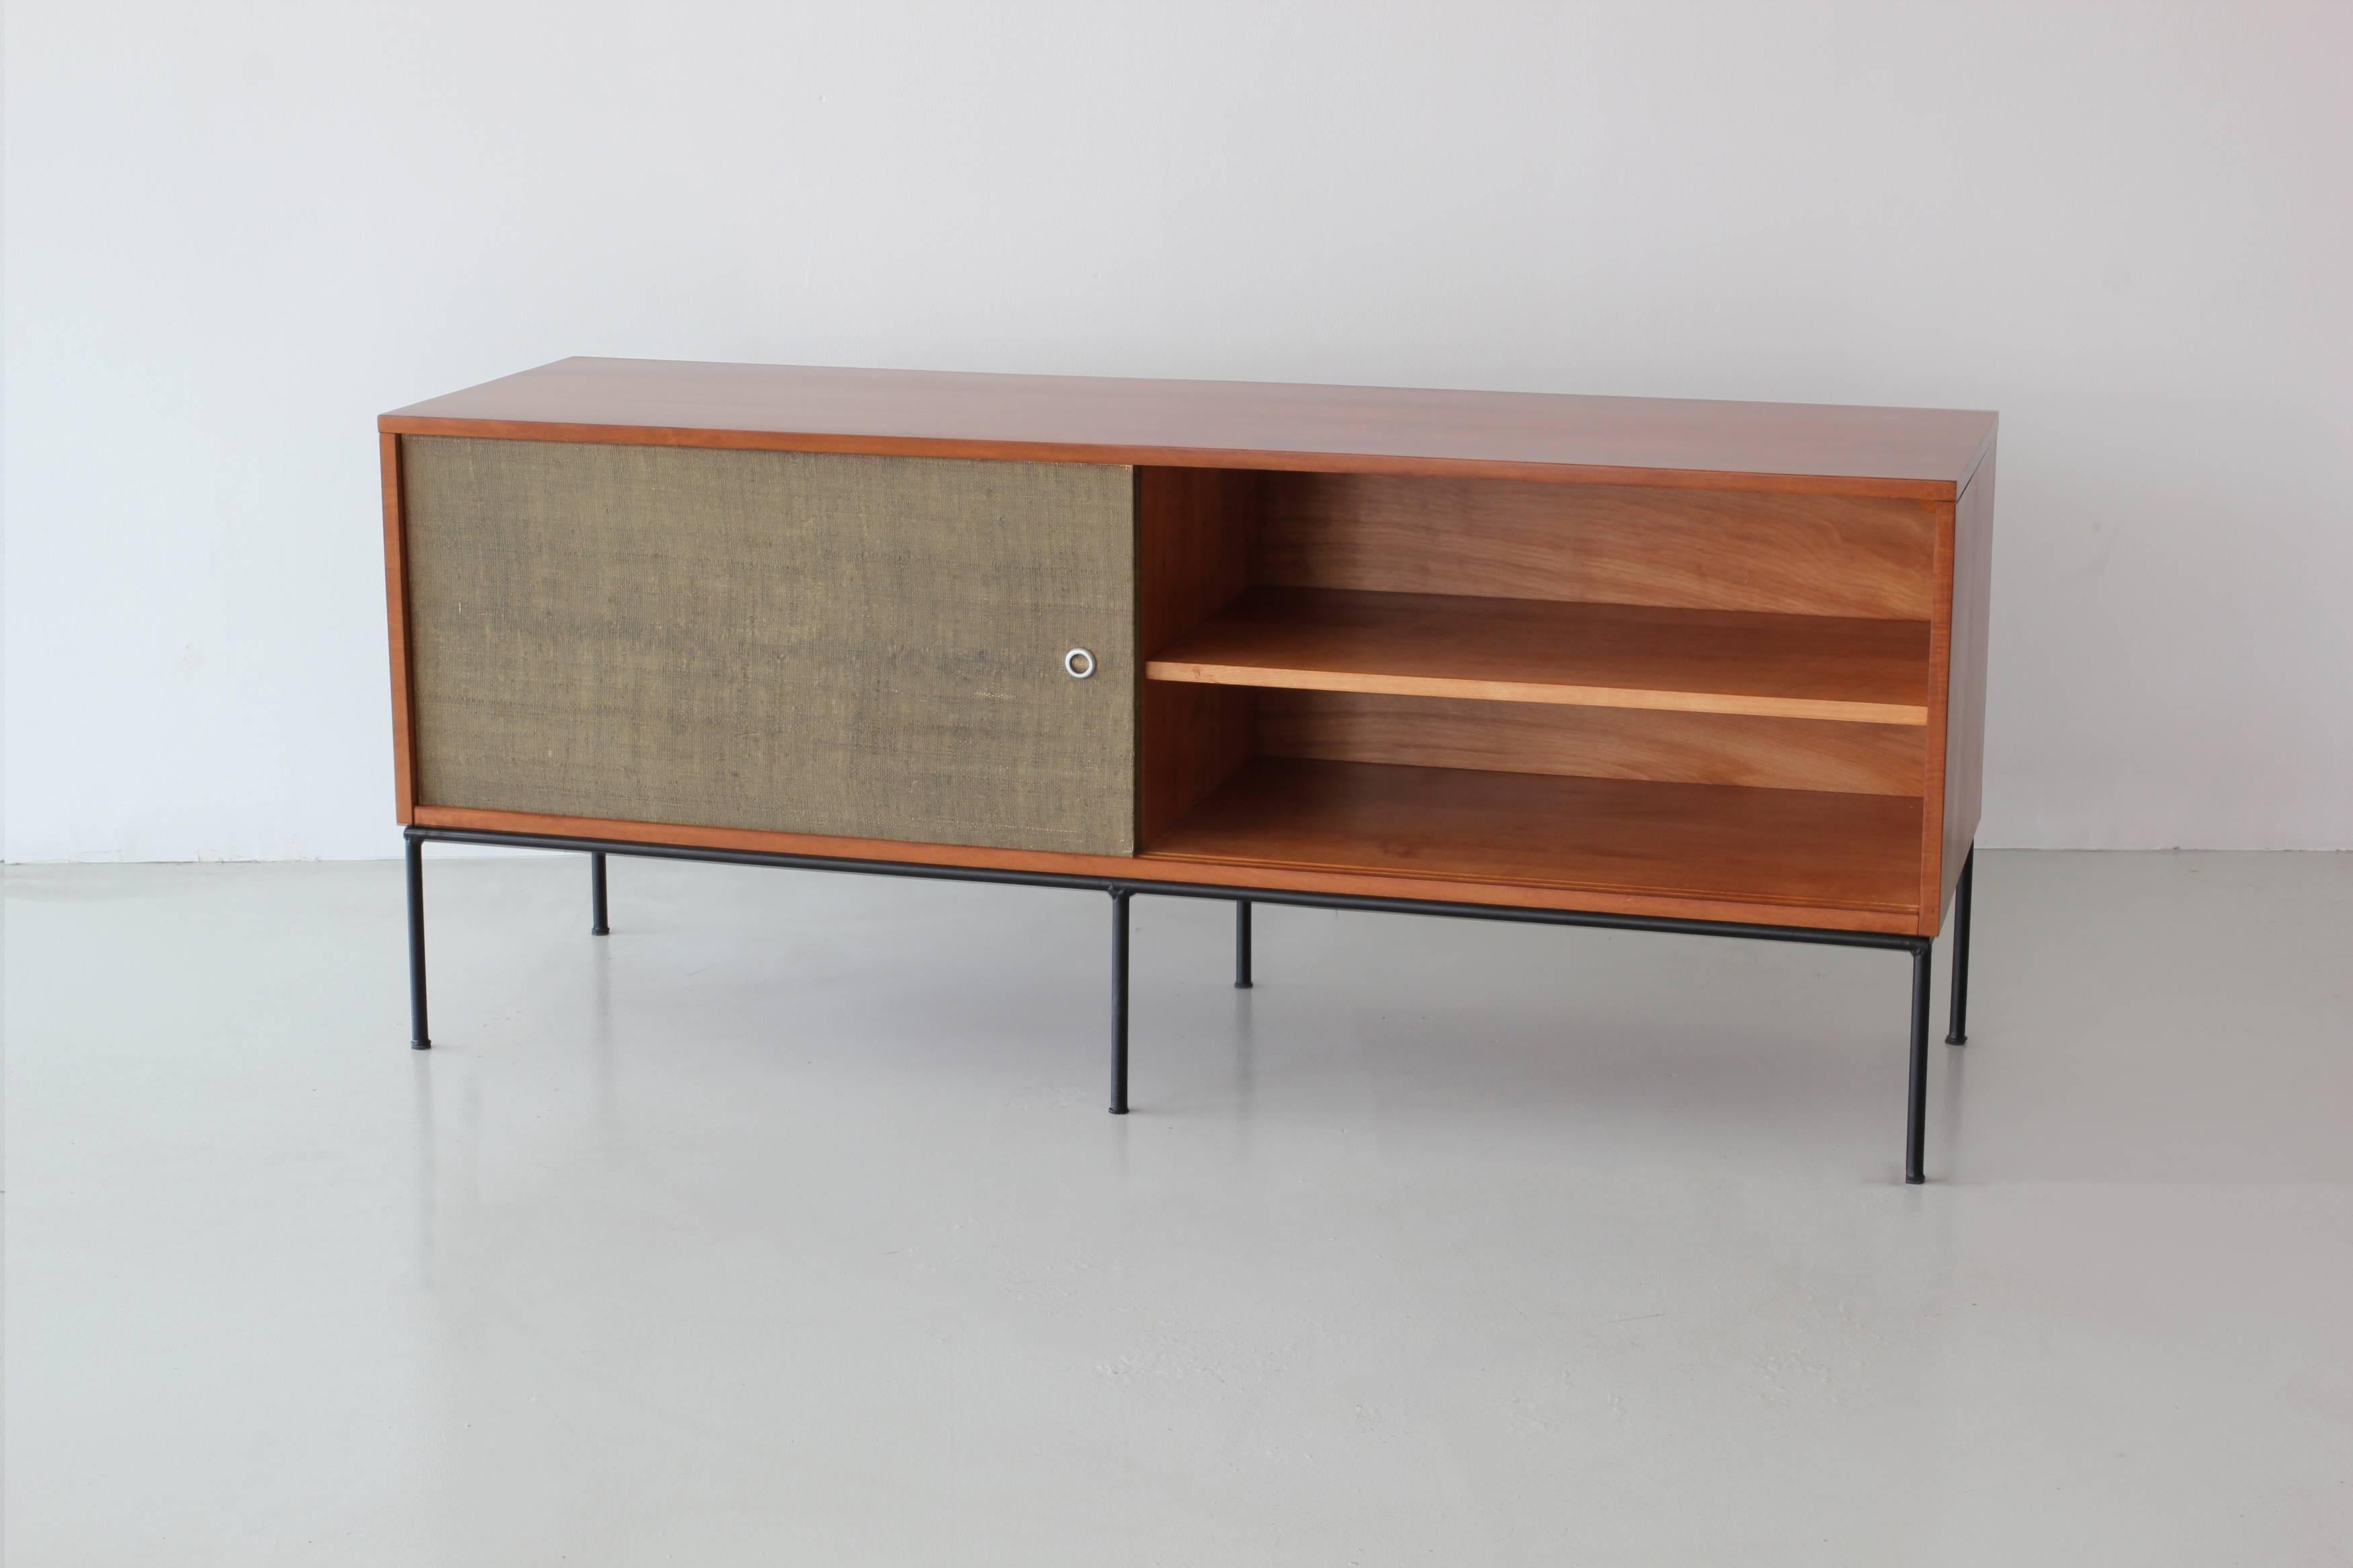 Paul McCobb credenza with sliding caned doors and open shelving on black iron base. 

Wood has been refinished/restored and caning is original with imperfections as photographed.